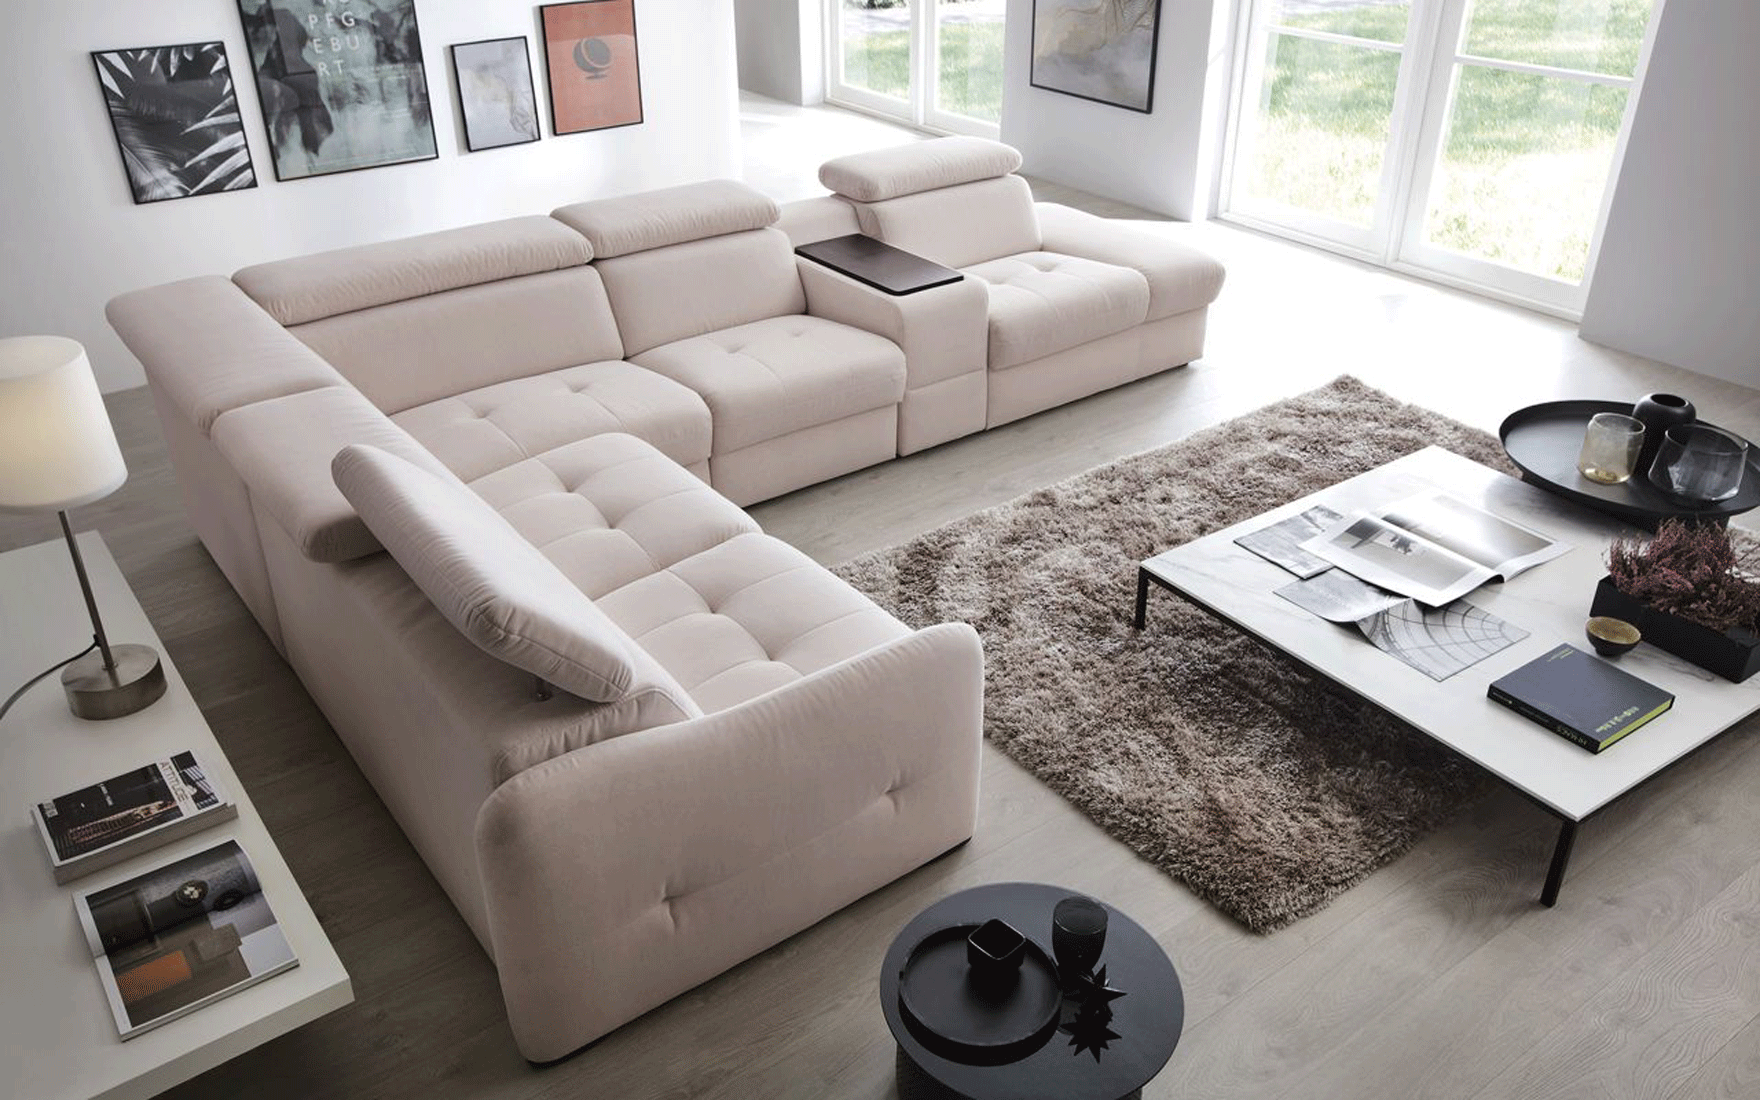 Living Room Furniture Sleepers Sofas Loveseats and Chairs Domani Sectional w/Recliner, storage